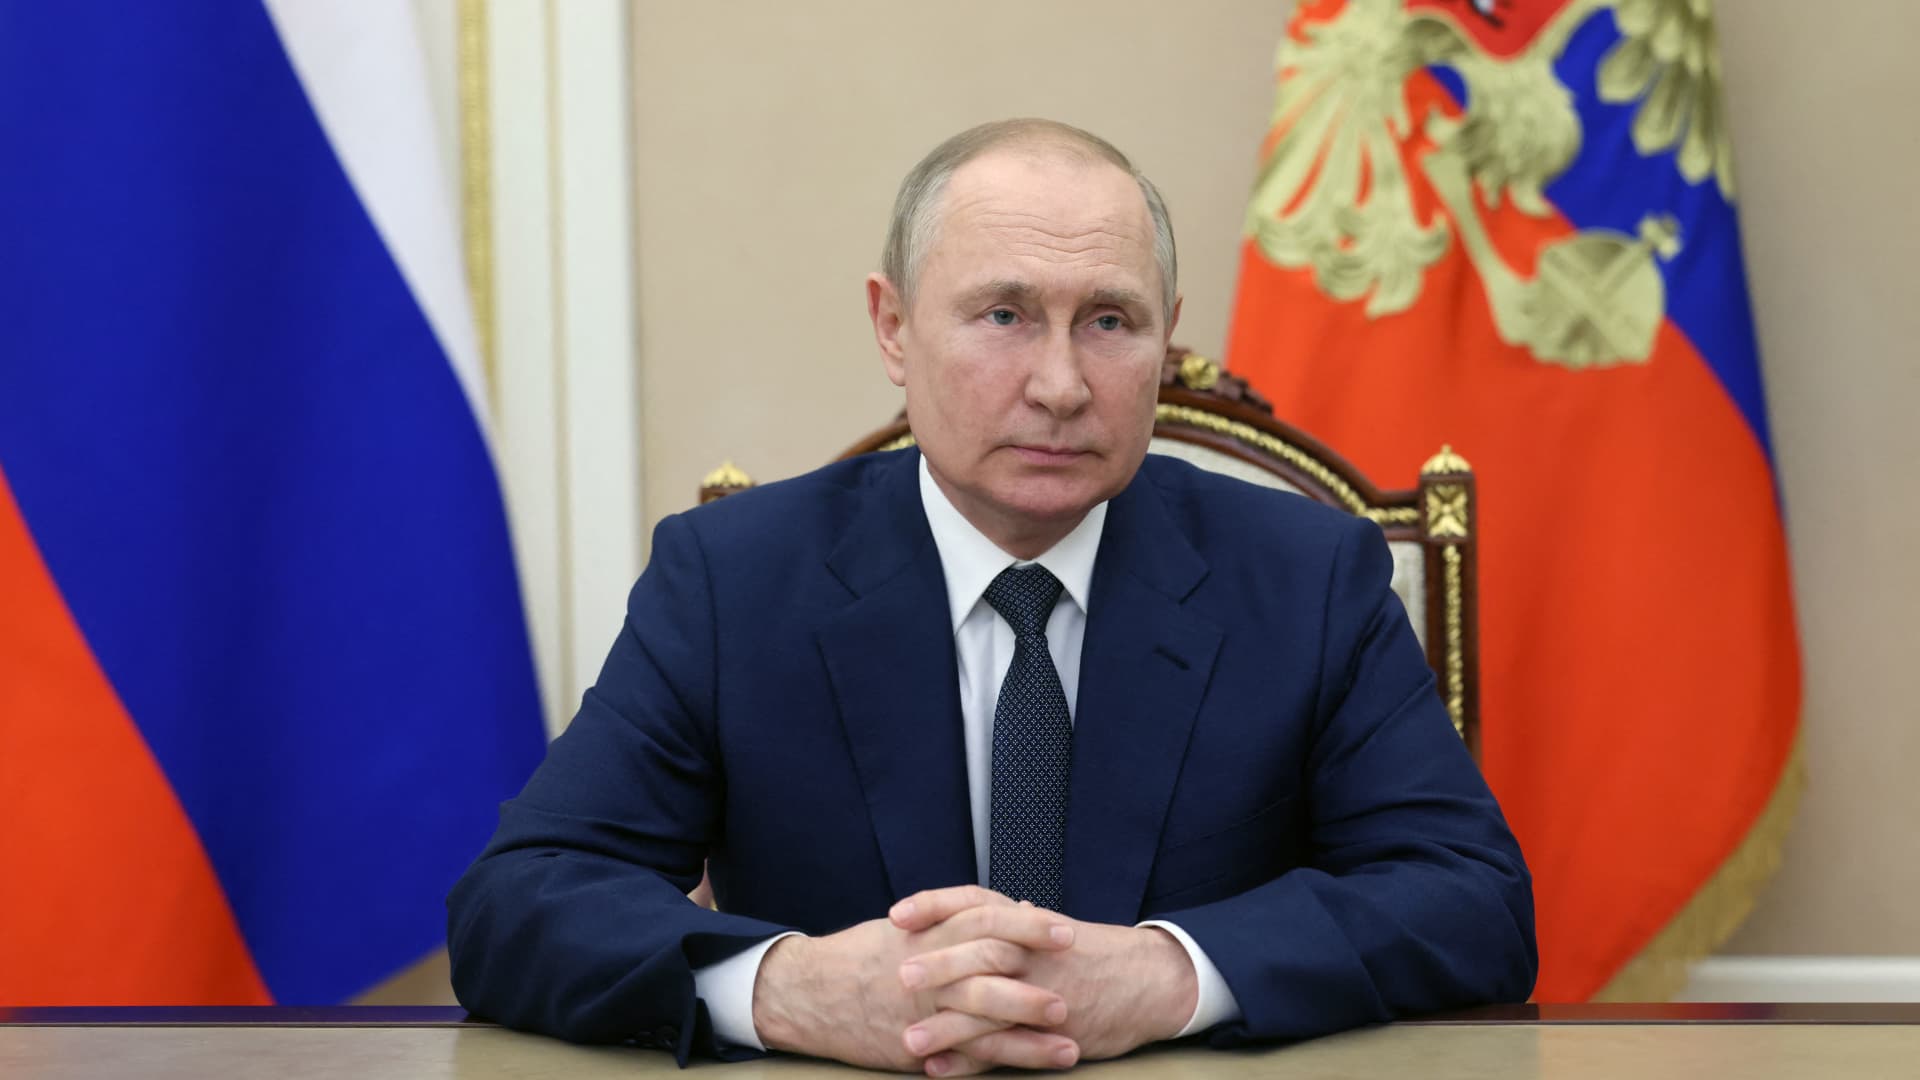 Russian President Vladimir Putin attends the IX Forum of the Regions of Russia and Belarus via a video link in Moscow, on July 1, 2022.